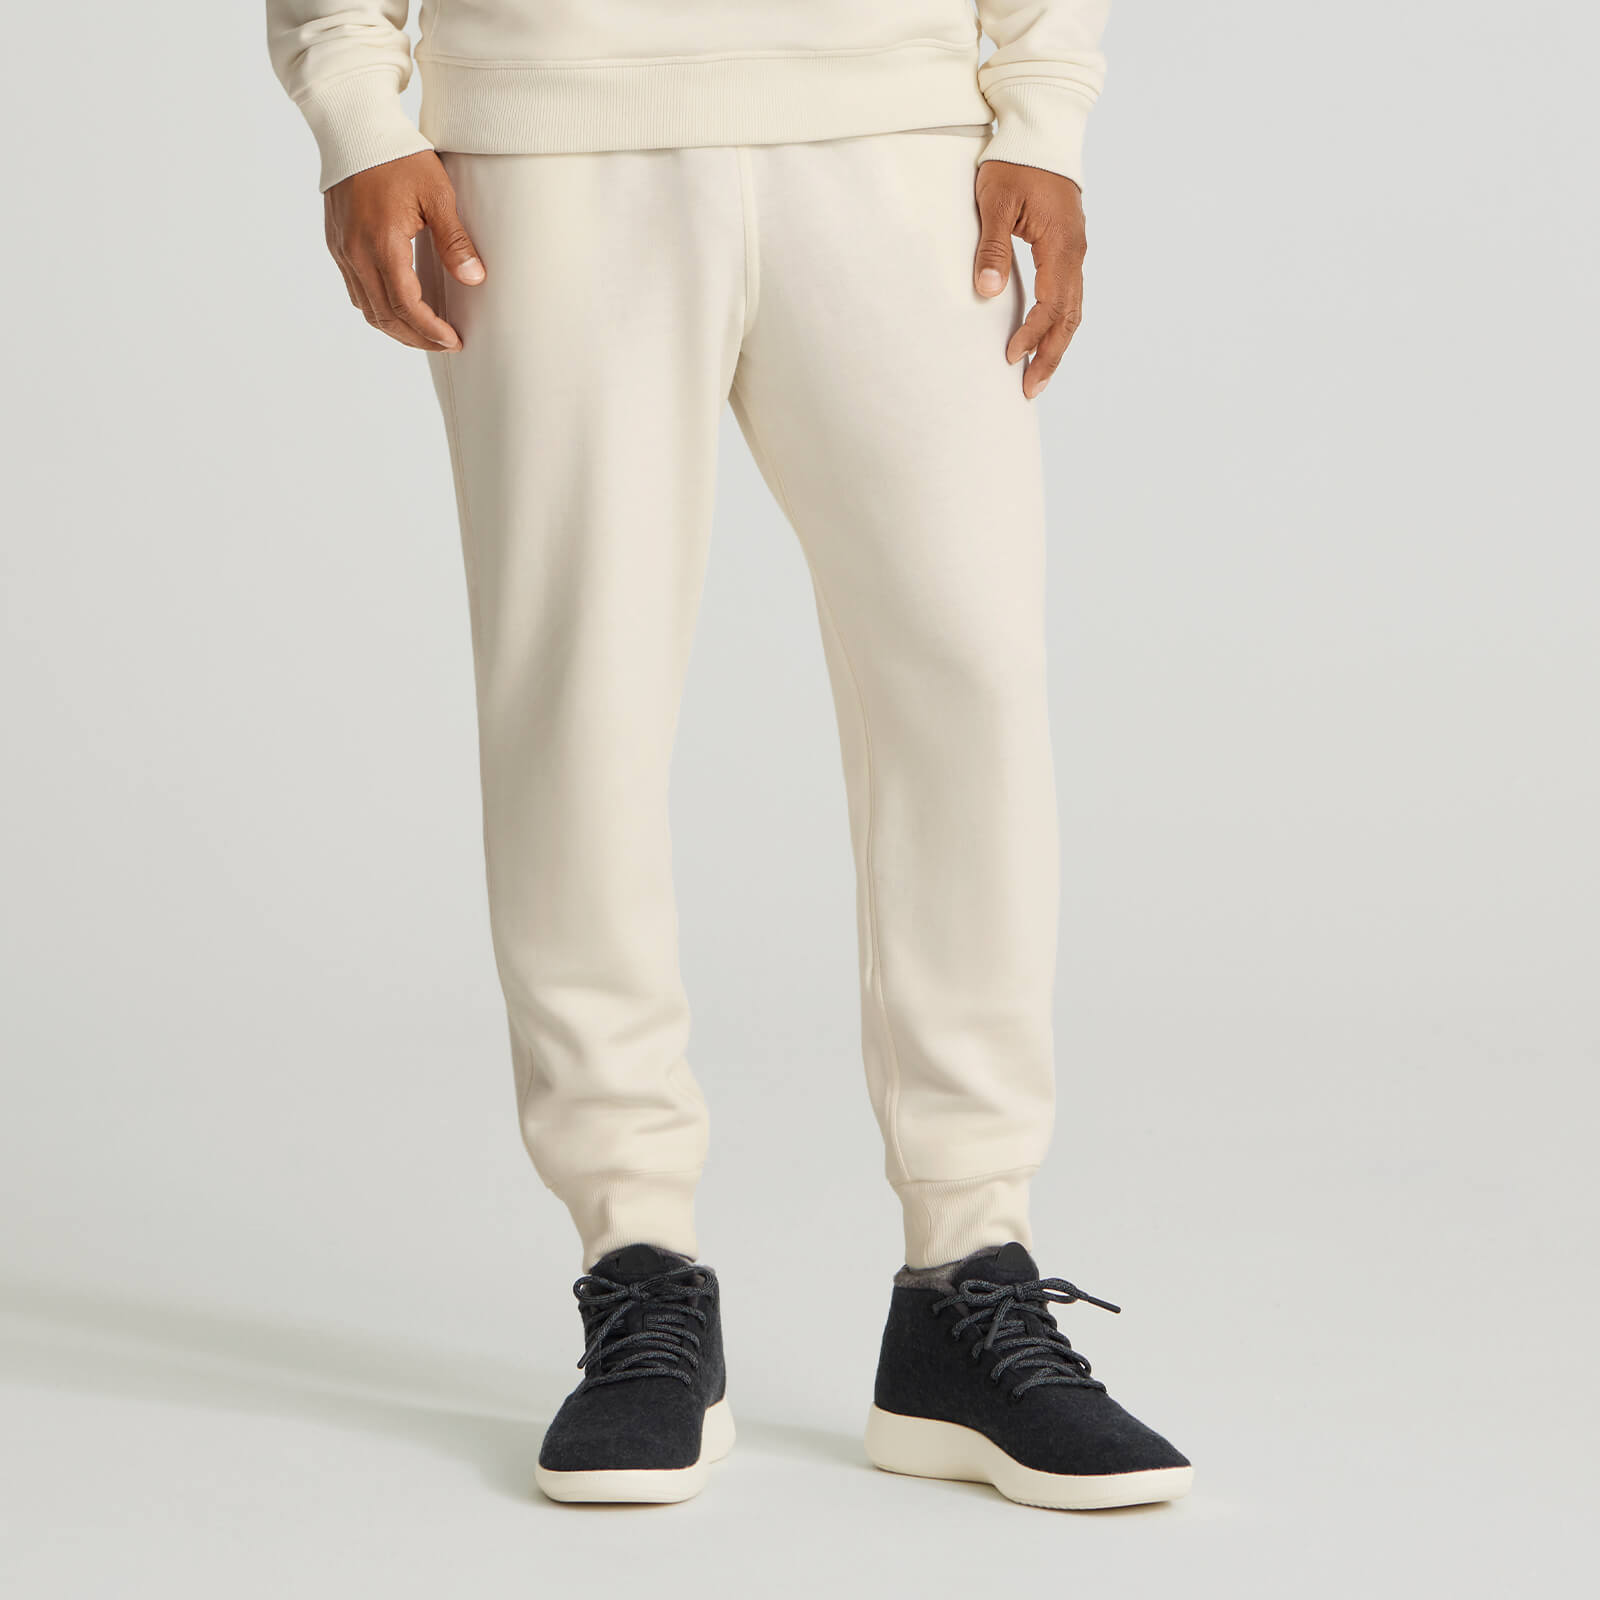 10 Cozy Sweatpants You'll Still Want When This Is Done - Sharp Magazine